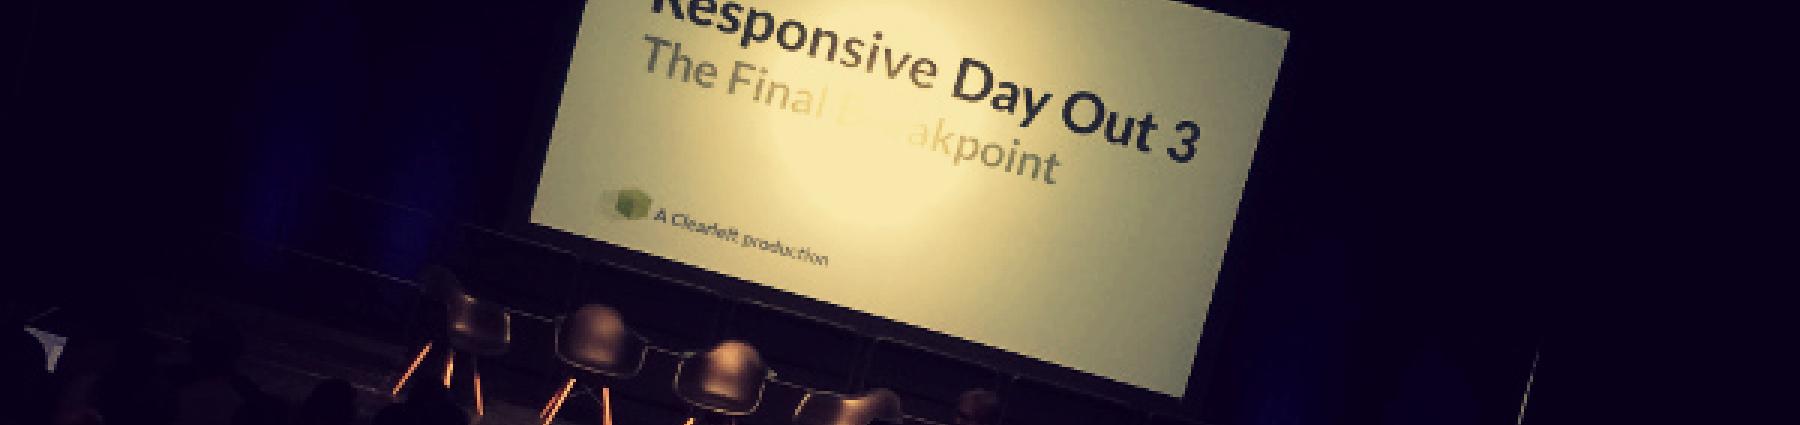 Responsive Day Out - The Final Breakpoint - First slide of the conference